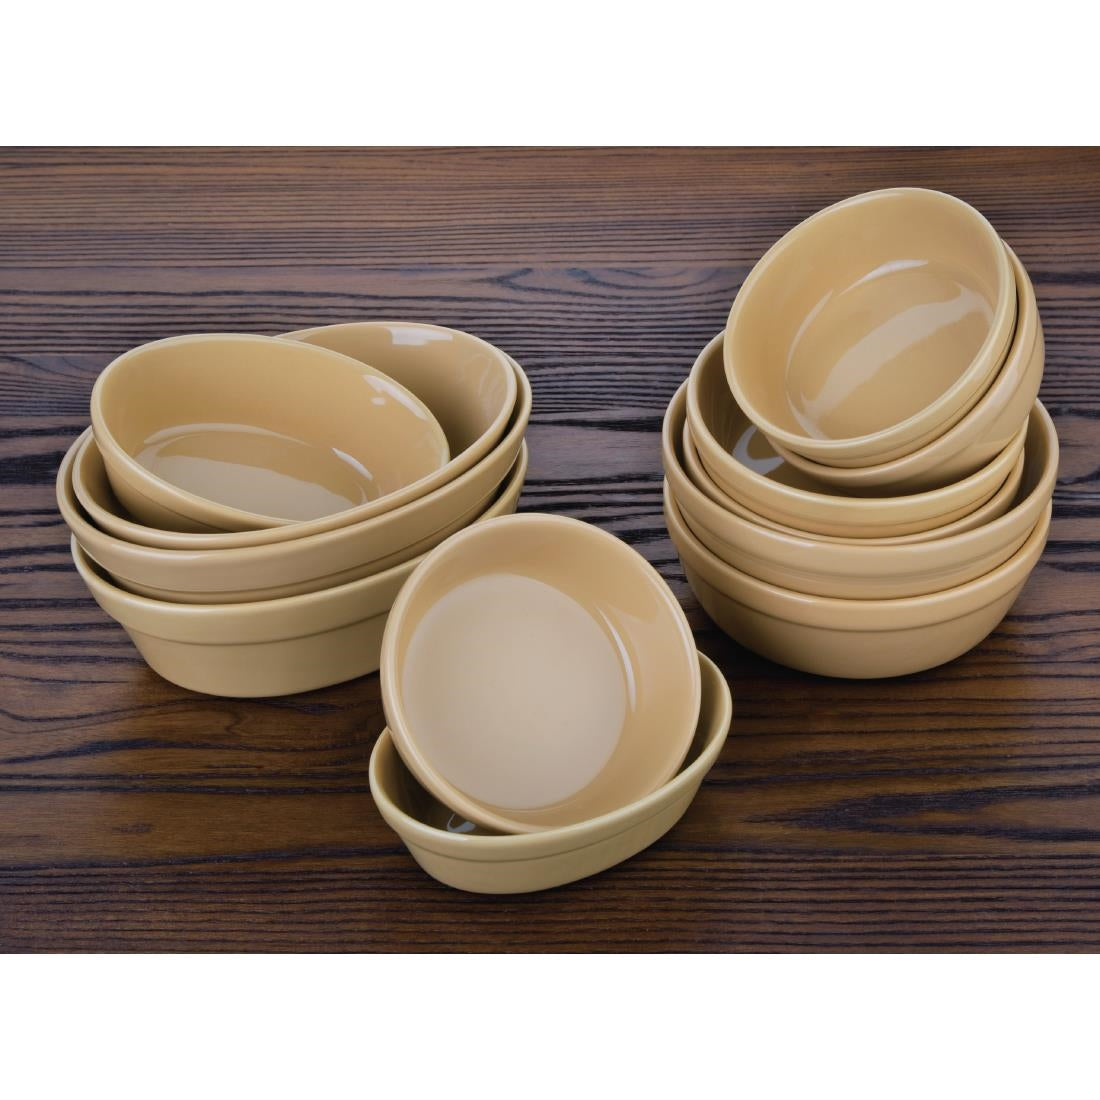 C027 Olympia Stoneware Round Pie Bowls 156mm (Pack of 6)